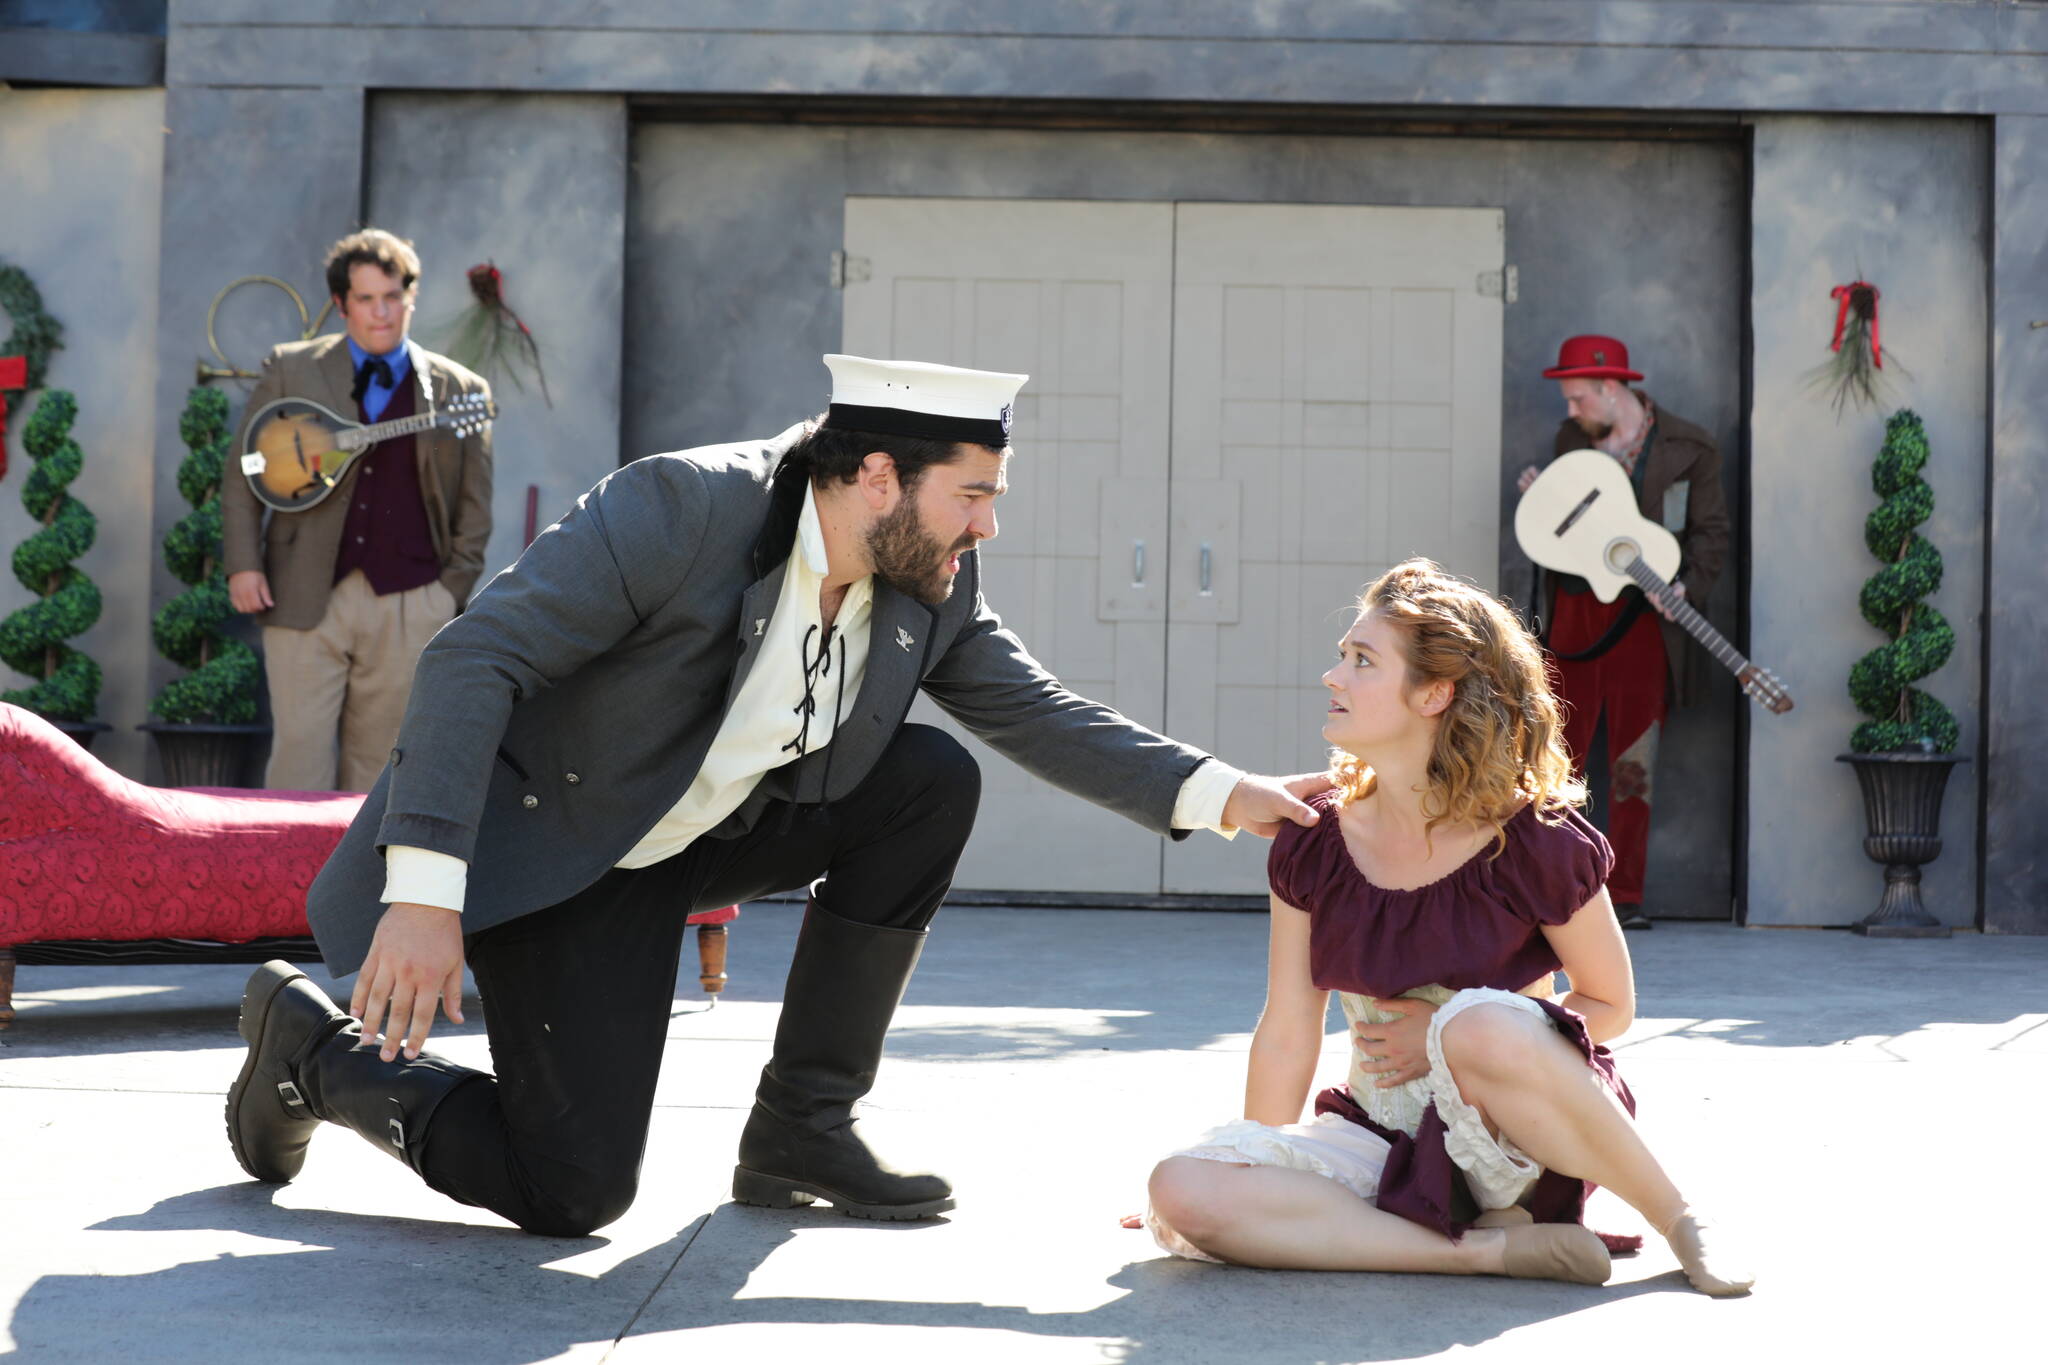 Photo by Michael Stadler
From left to right, Blake Henry, Cameron Gray, Helen Roundhill and Orion Schwalm in Island Shakespeare Festival’s 2018 production of “Twelfth Night.” The festival returns this year with three plays and people involved in the production are searching for a place to stay on Whidbey Island for the summer.